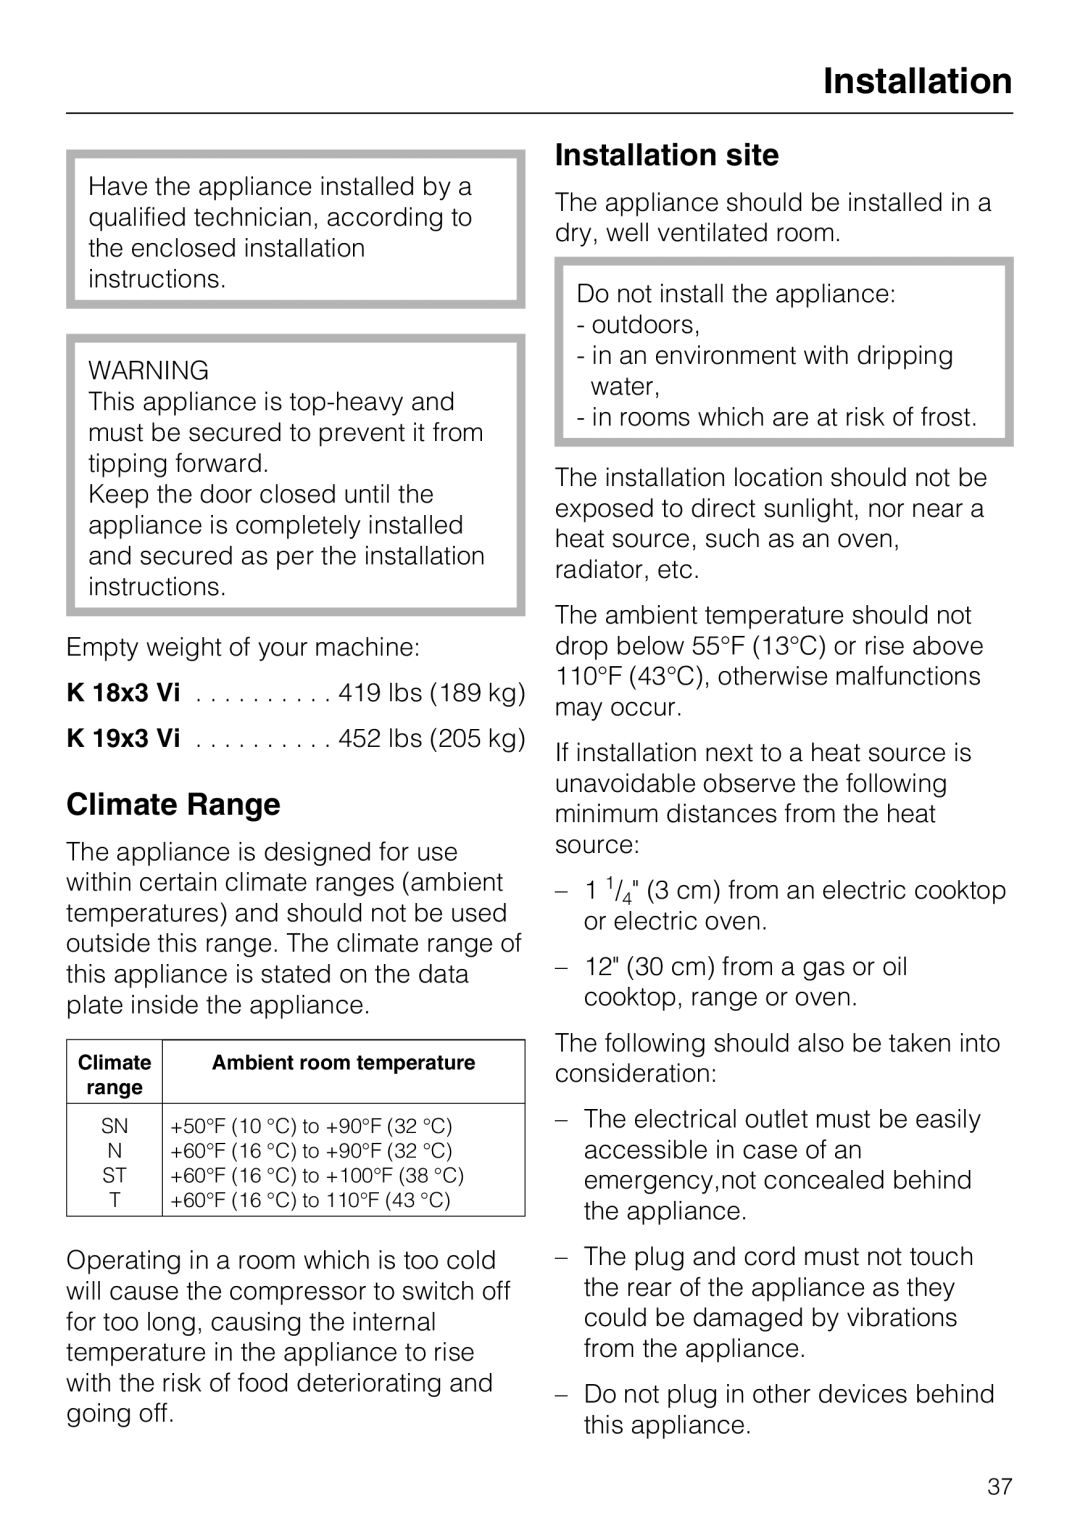 Miele 09 920 570 installation instructions Climate Range, Installation site 